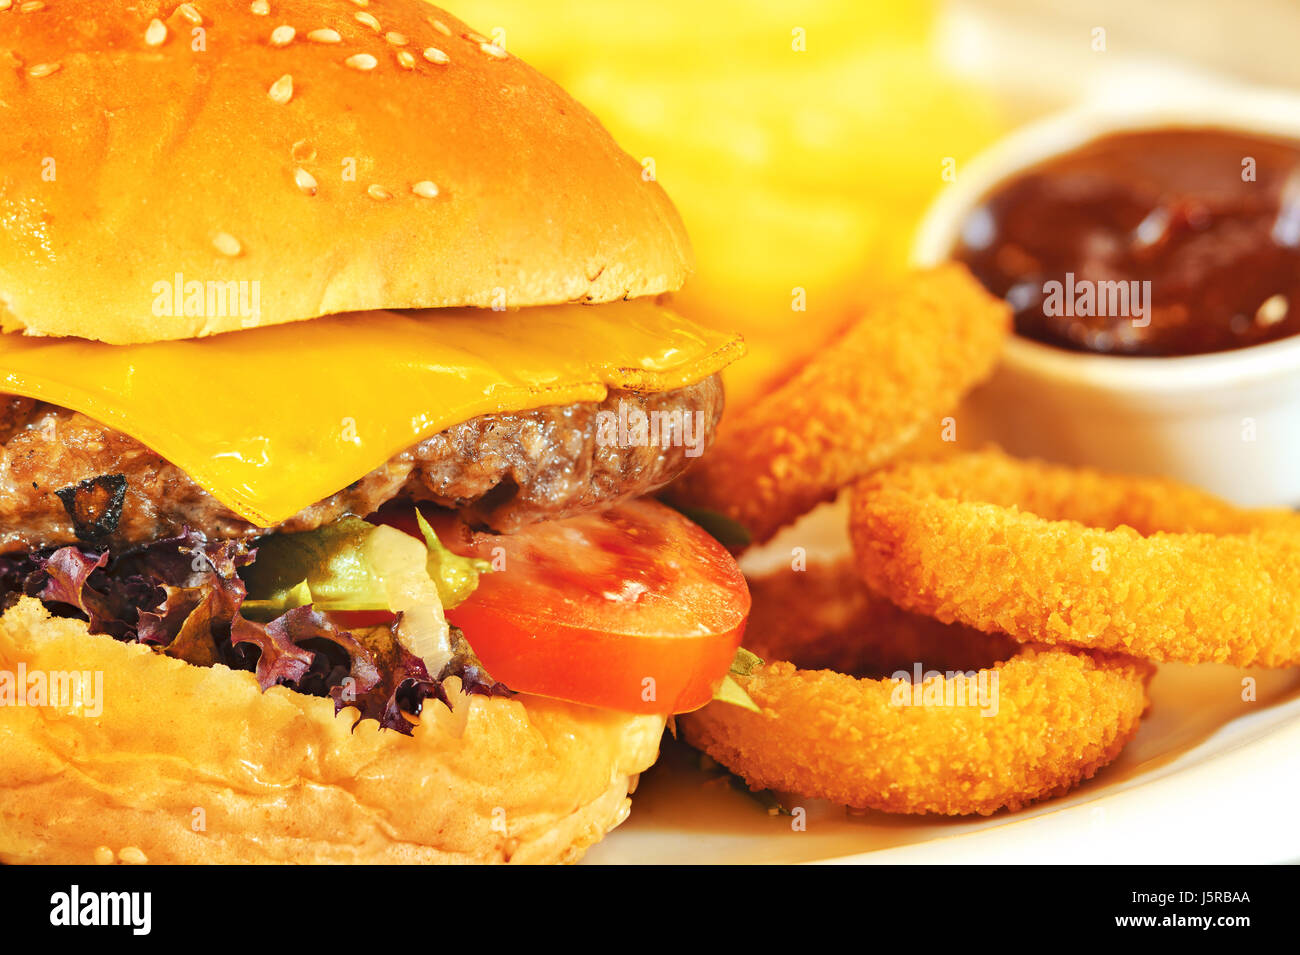 Burger, french fries and onion rings with barbeque sauce Stock Photo